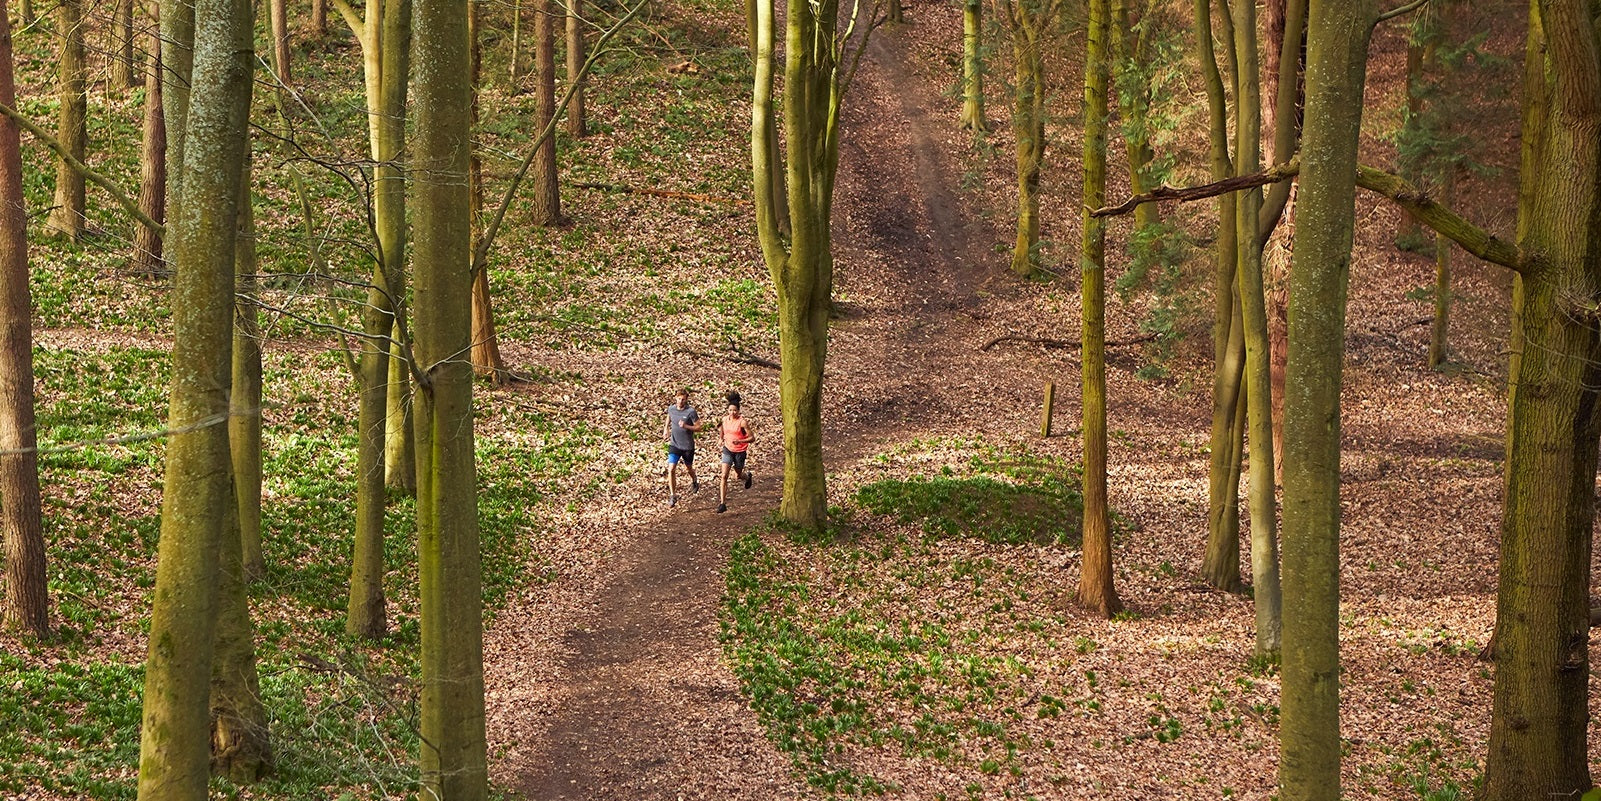 The Beginner's Guide to Trail Running